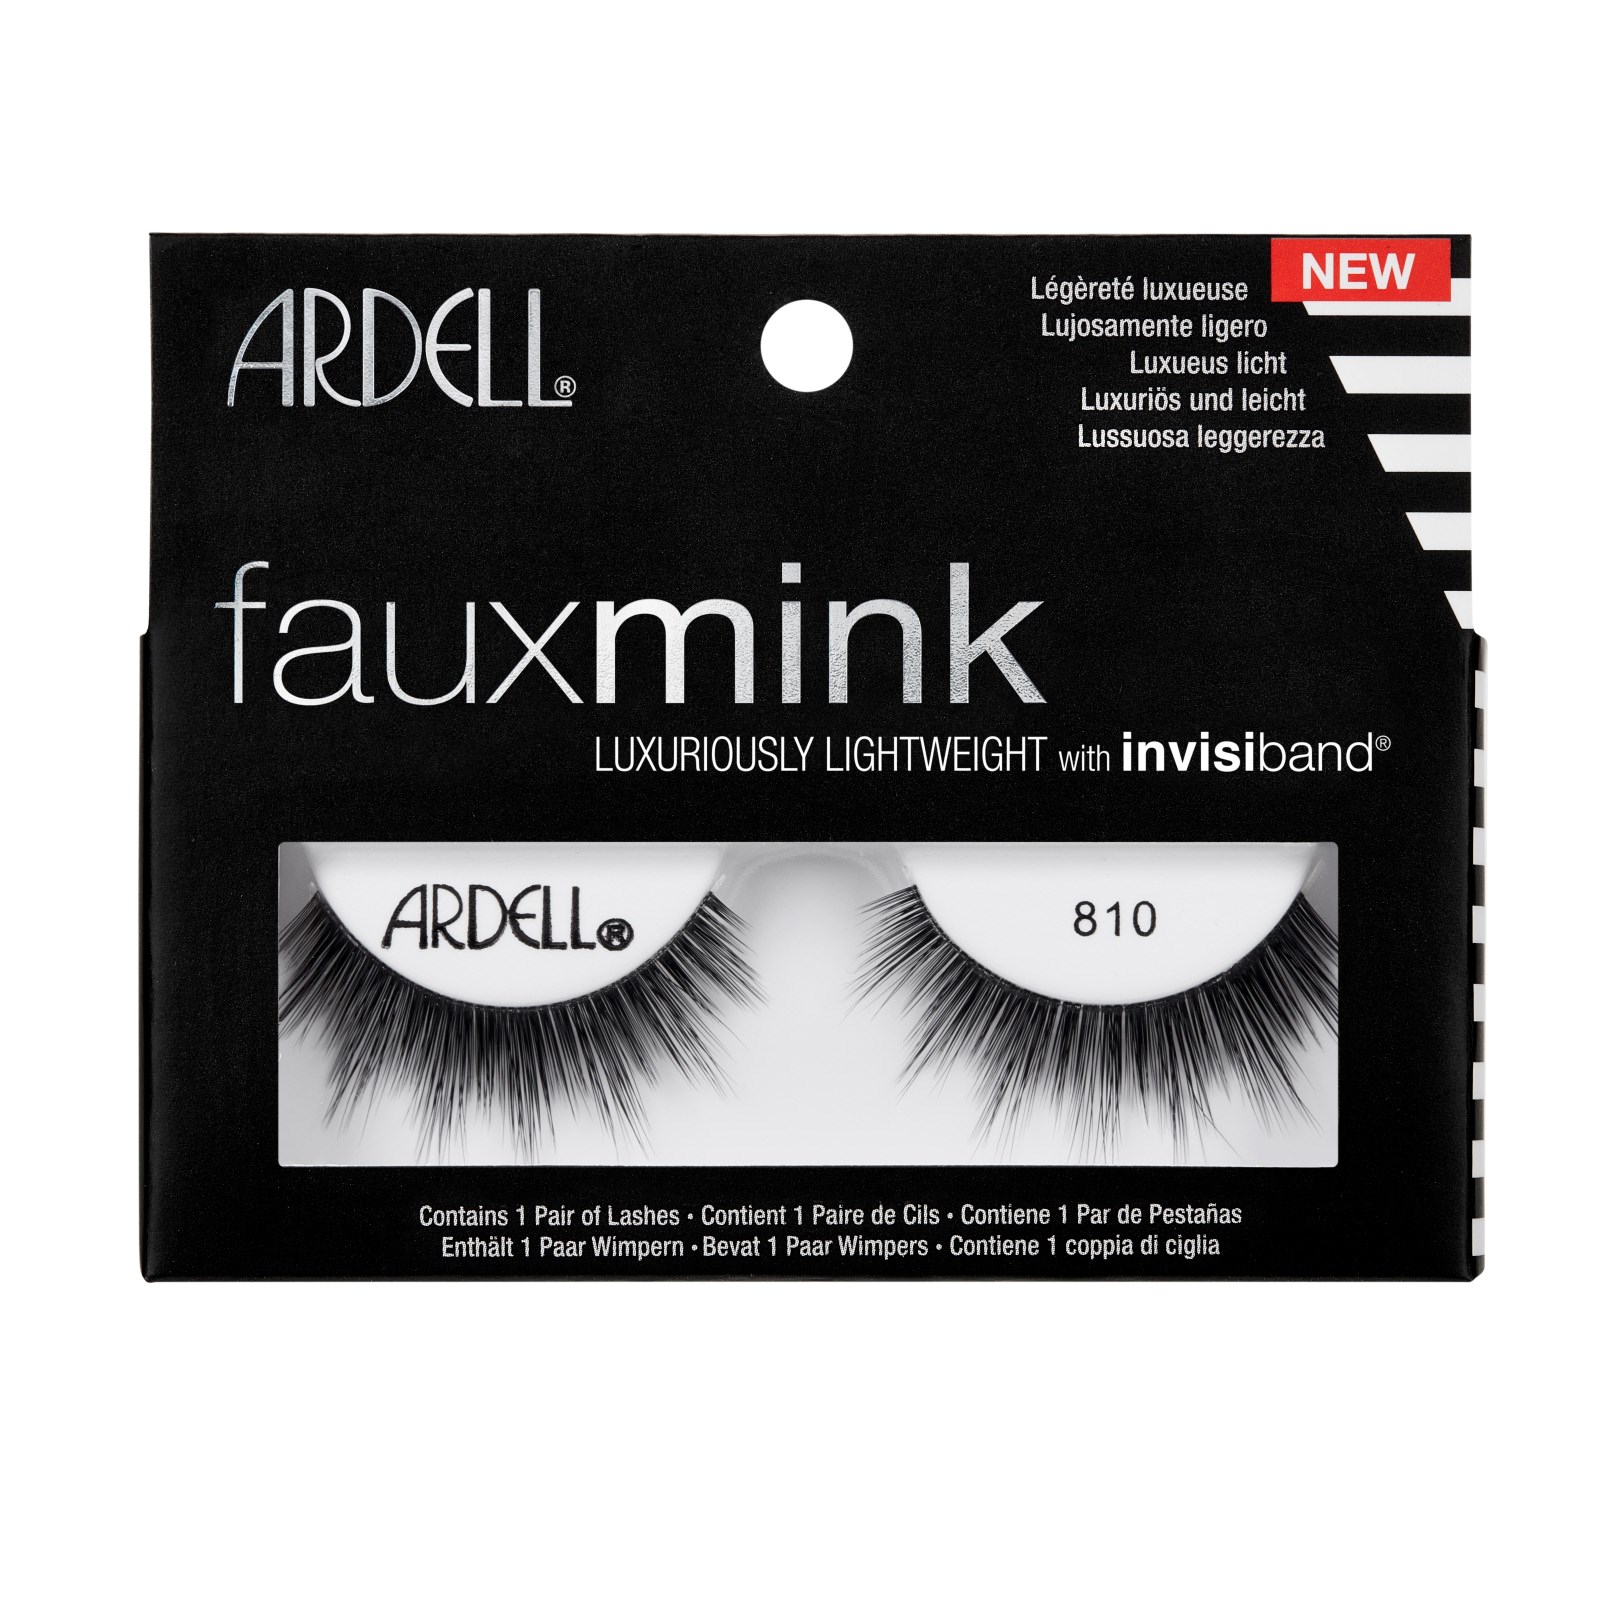 Ardell Faux Mink Luxuriously Lightweight Lashes 810